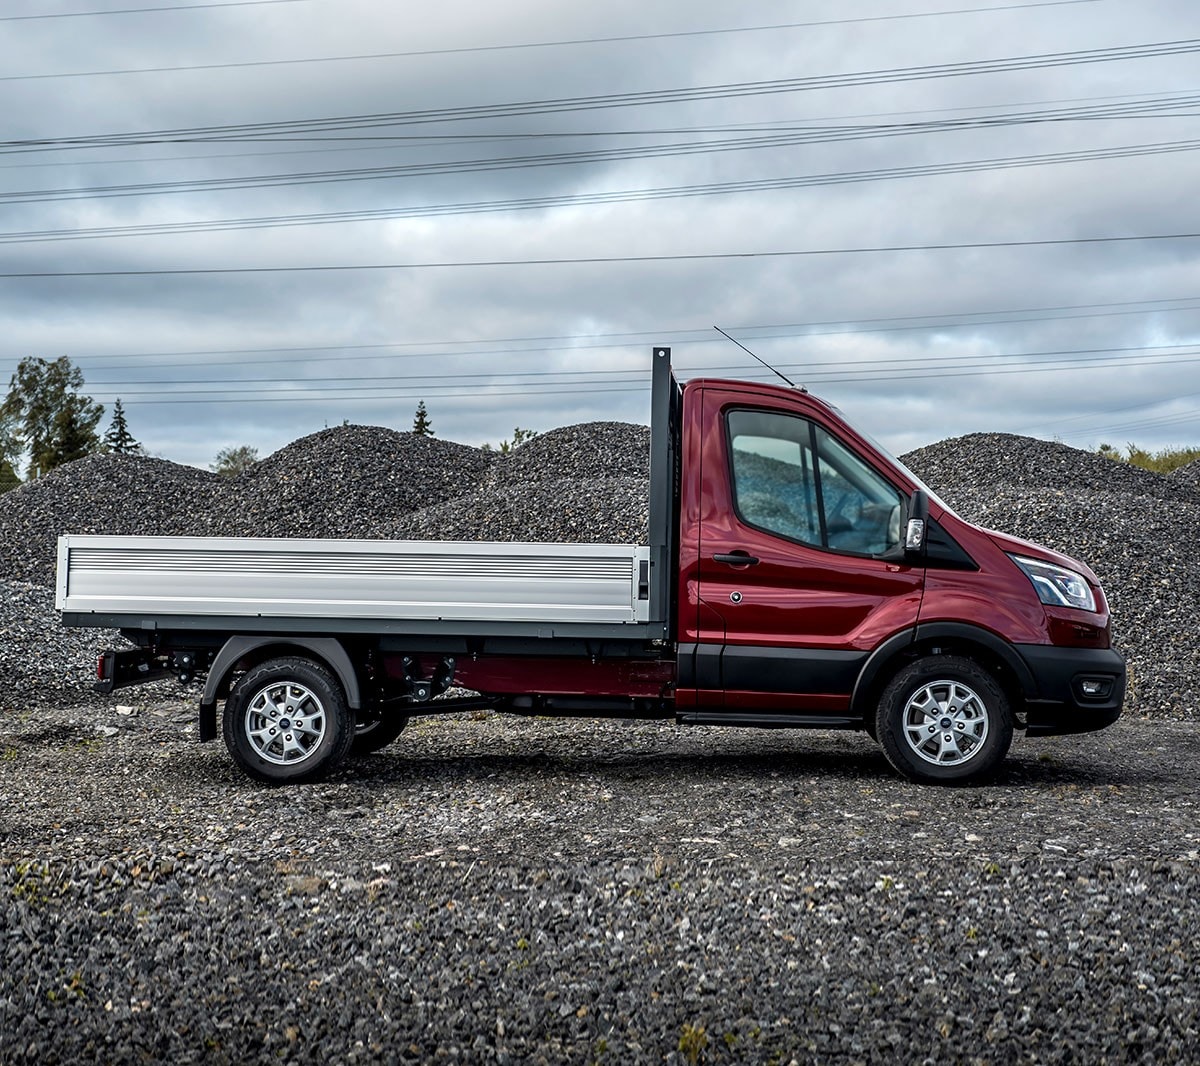 Transit chassis cab